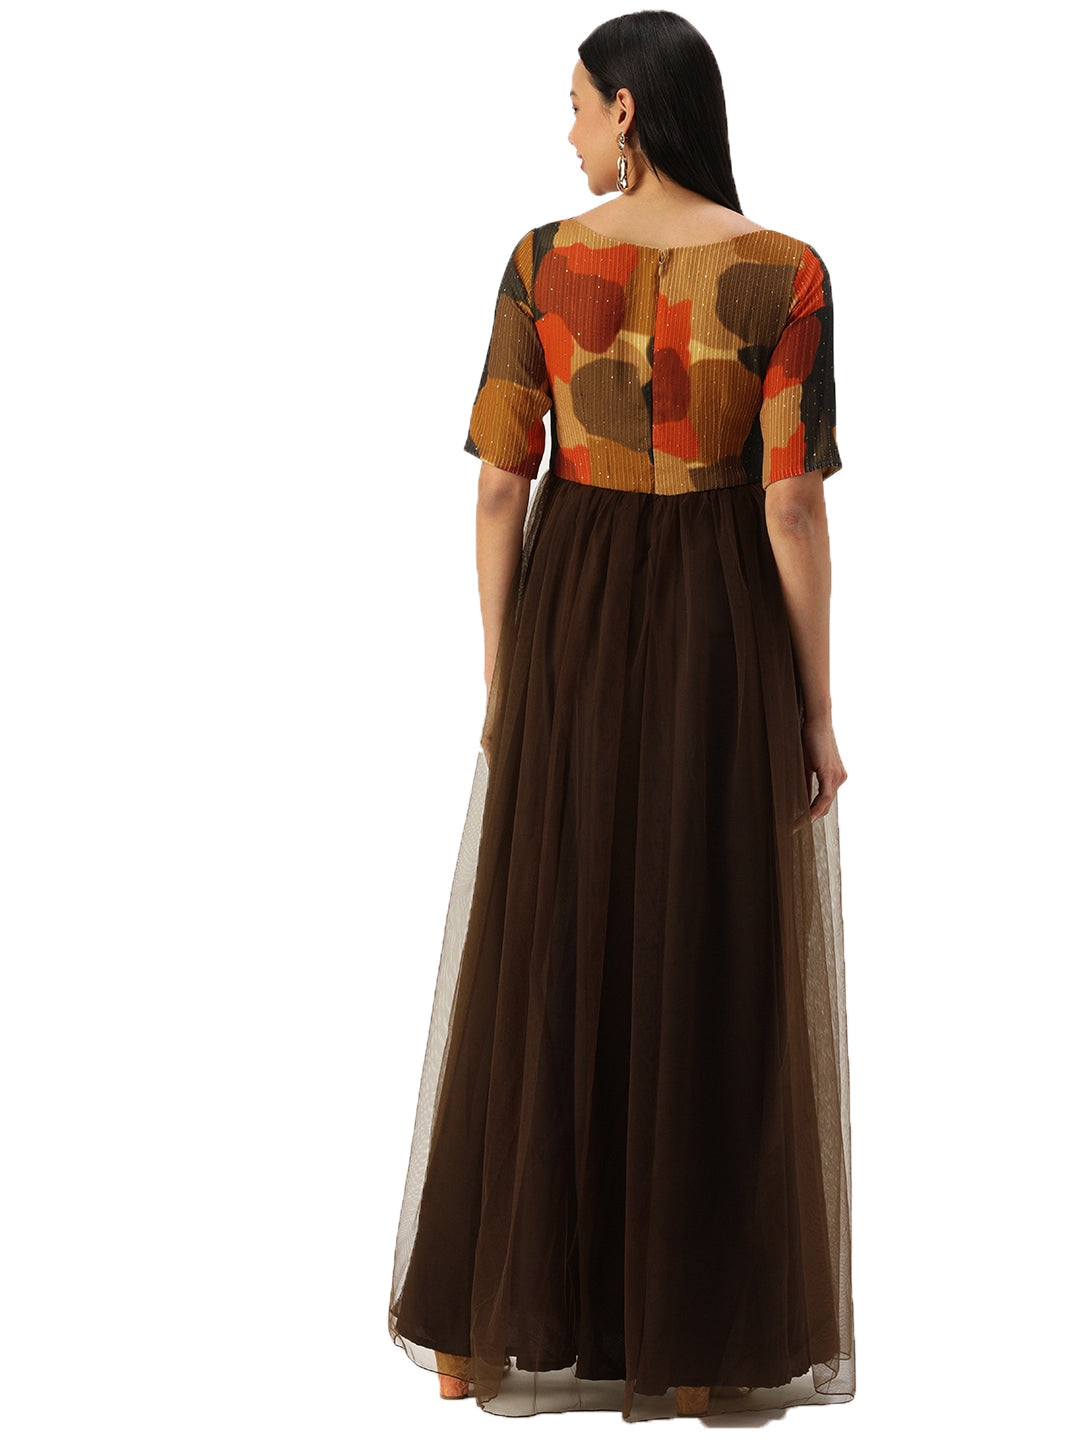 Multicolored-Embroidered-&-Brown-Net-Gown